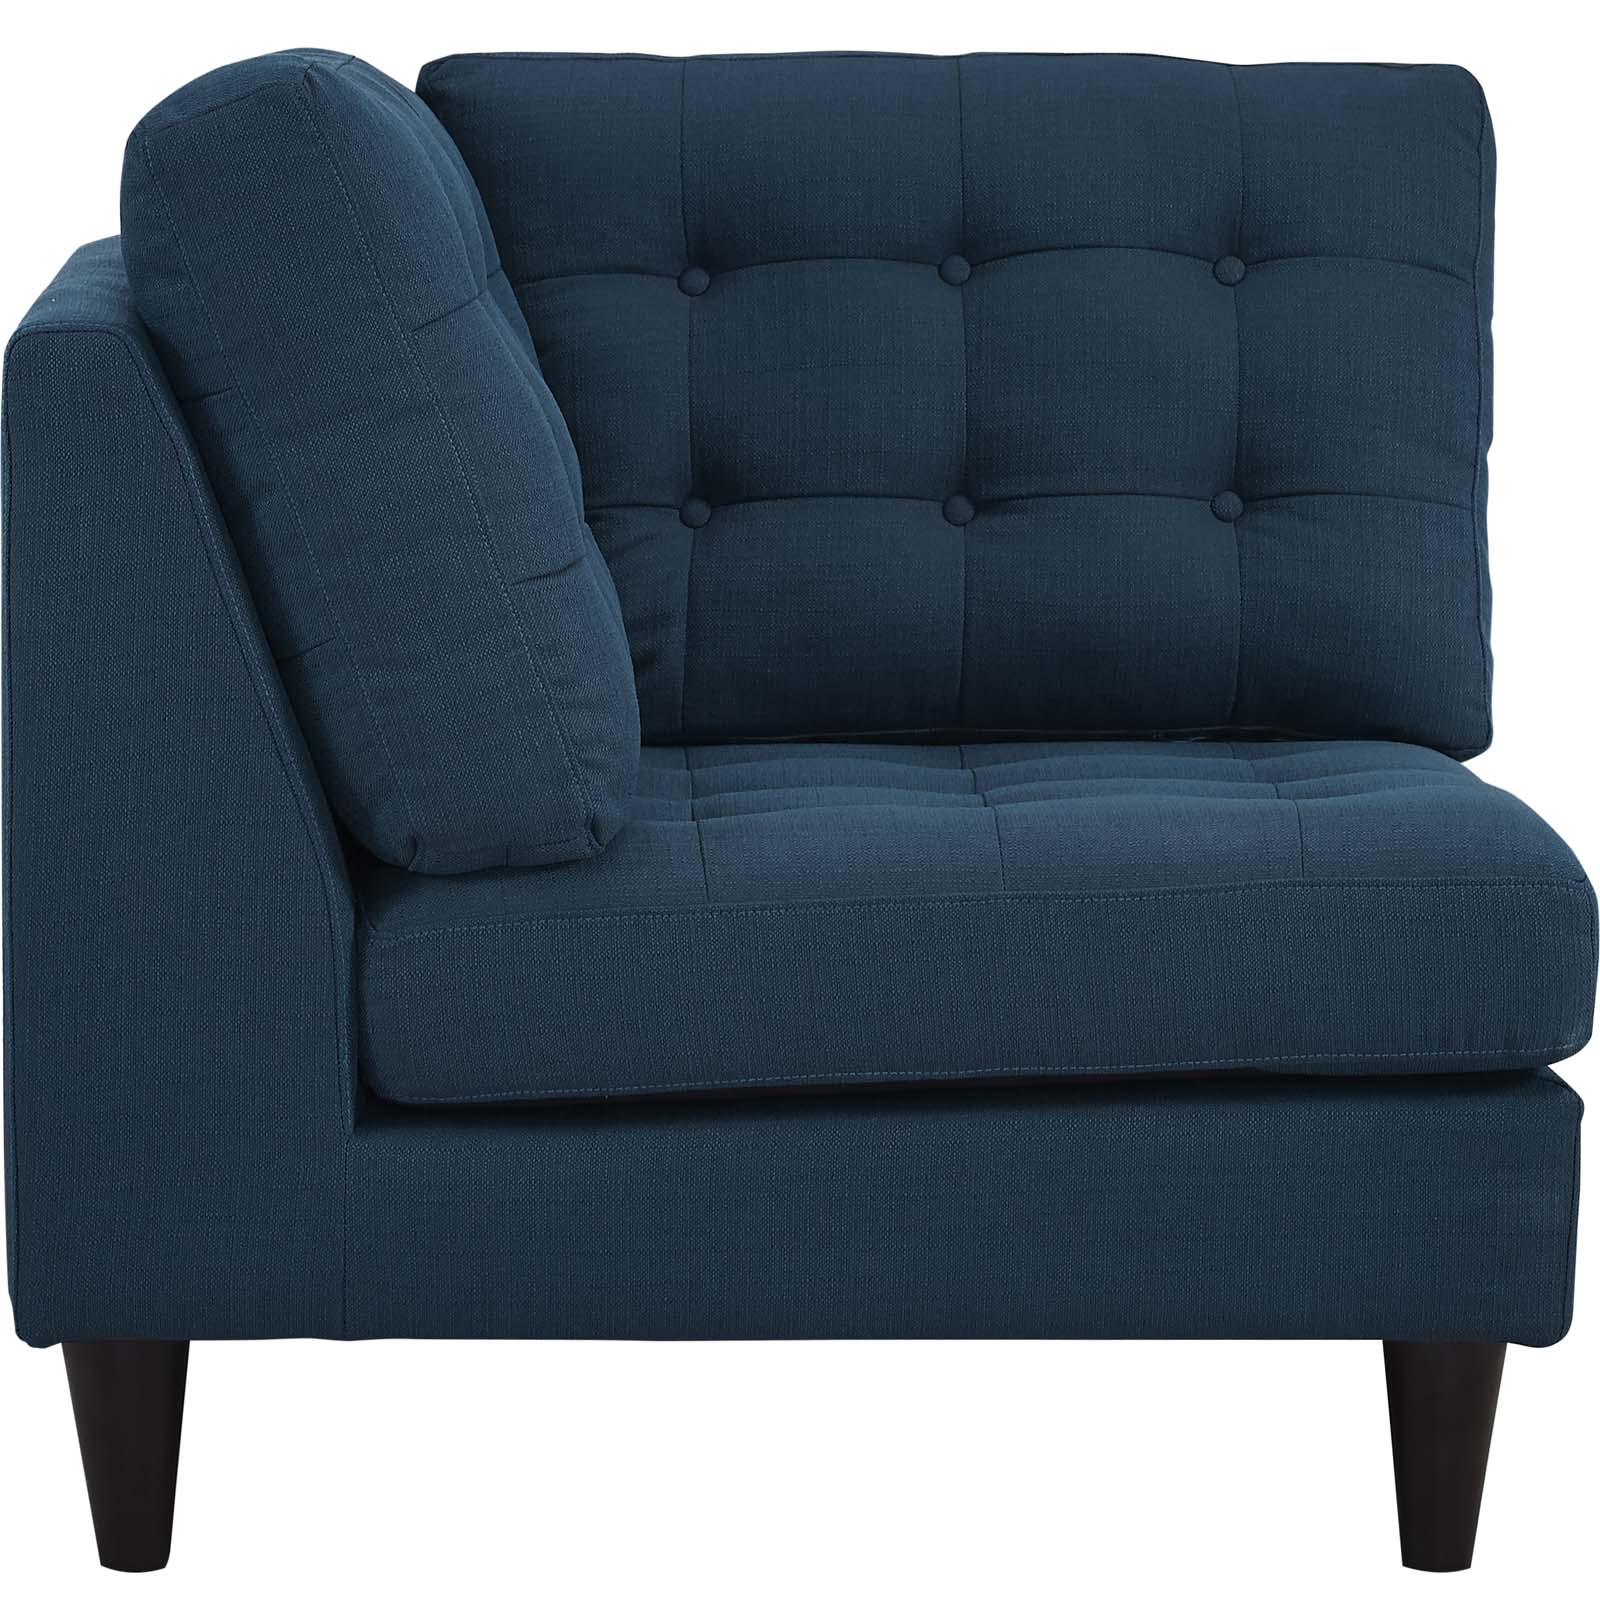 Modway Accent Chairs - Empress Upholstered Fabric Corner Sofa Azure